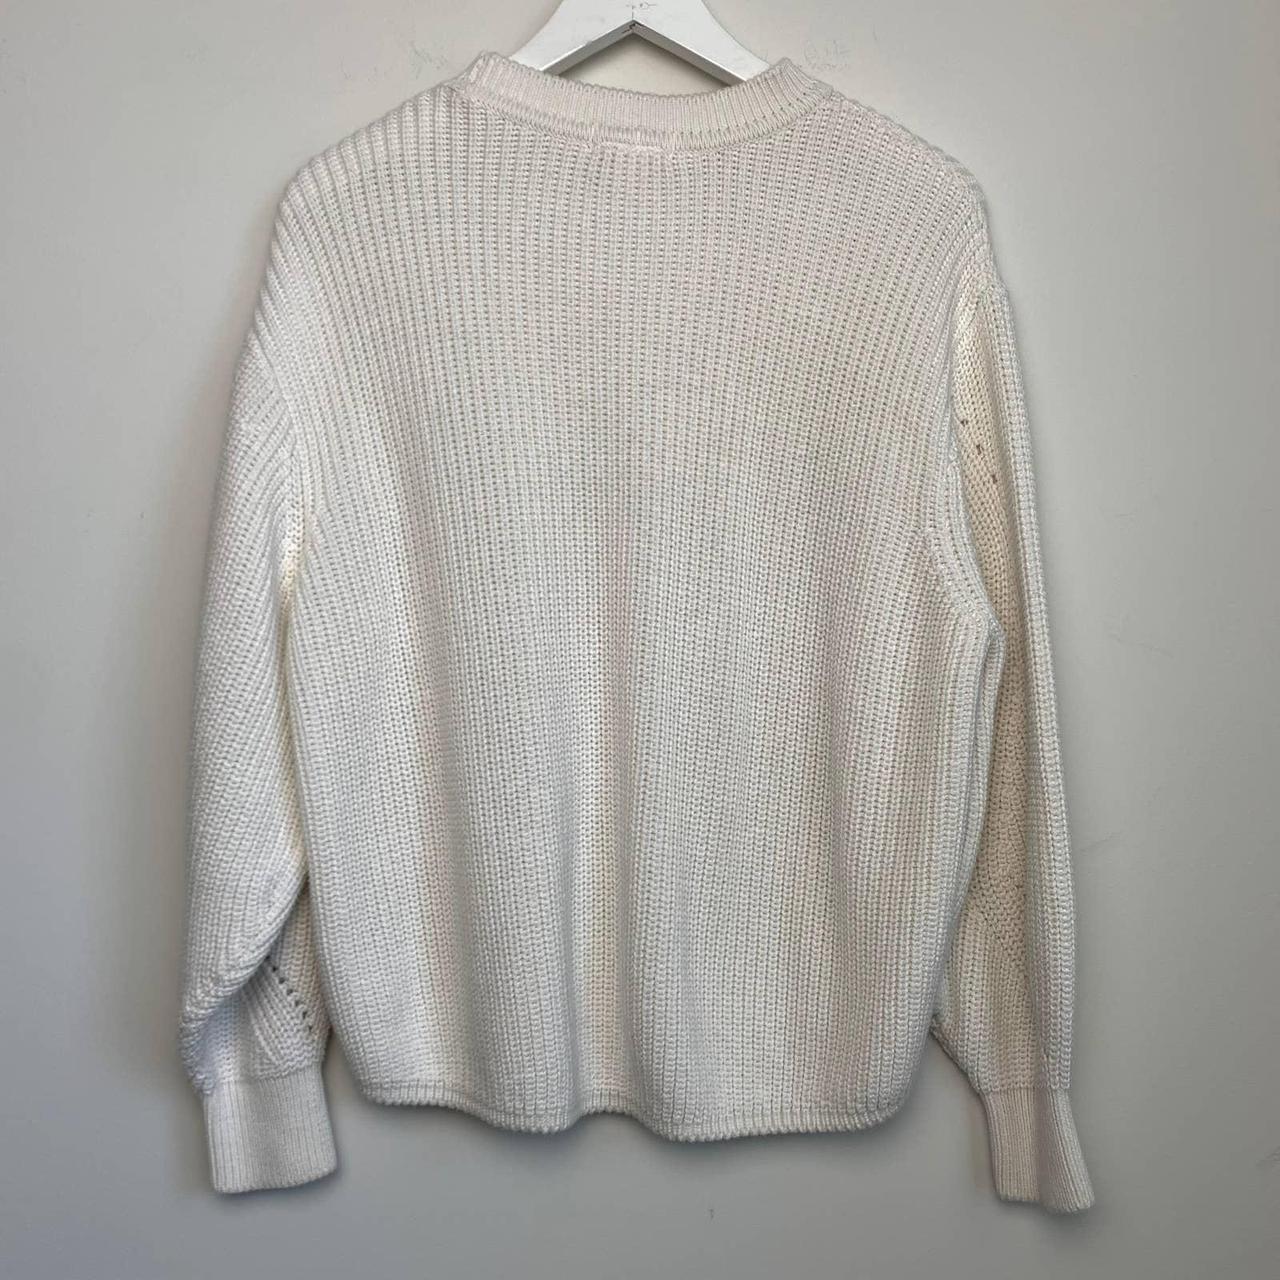 White chunky knit sweater from H&M is the perfect... - Depop